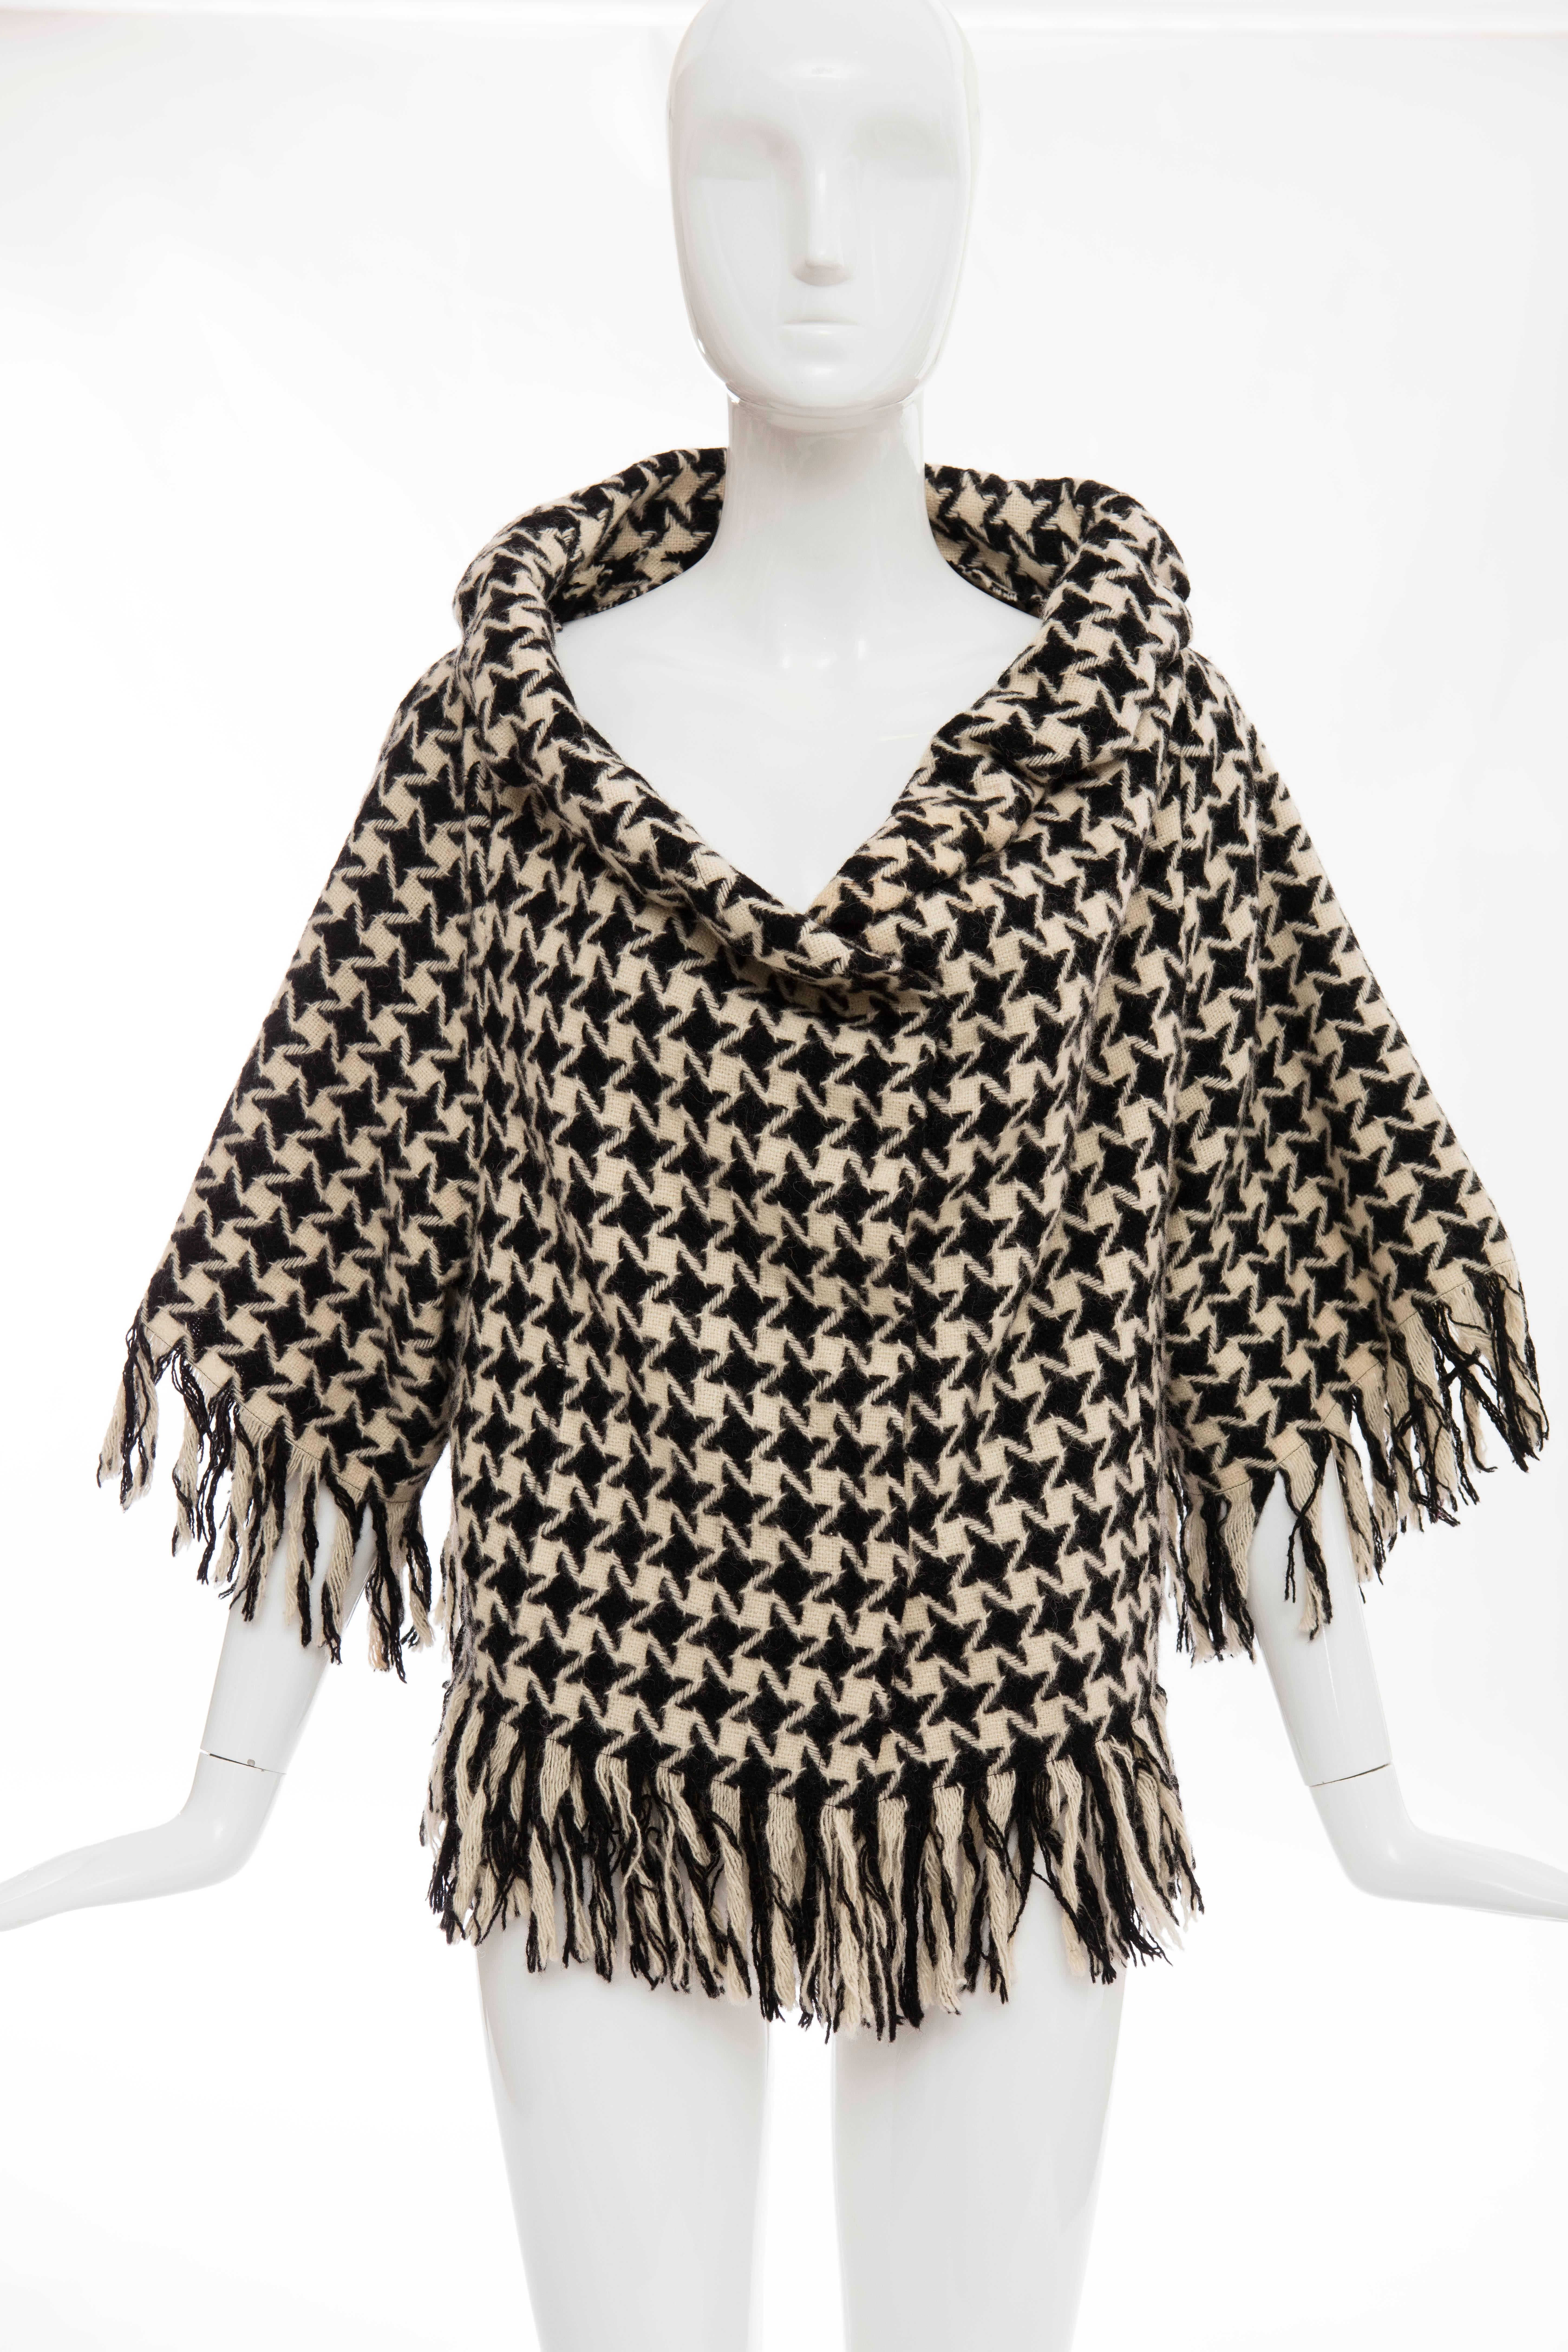 Yohji Yamamoto, Autumn-Winter 2003 wool houndstooth concealed snap front jacket with fringe trim,three quarter length sleeves, dual slit front pockets and fully lined.

Japan: Size 3

Bust 46, Waist 40, Shoulder 19.5, Length 22, Sleeve 24
